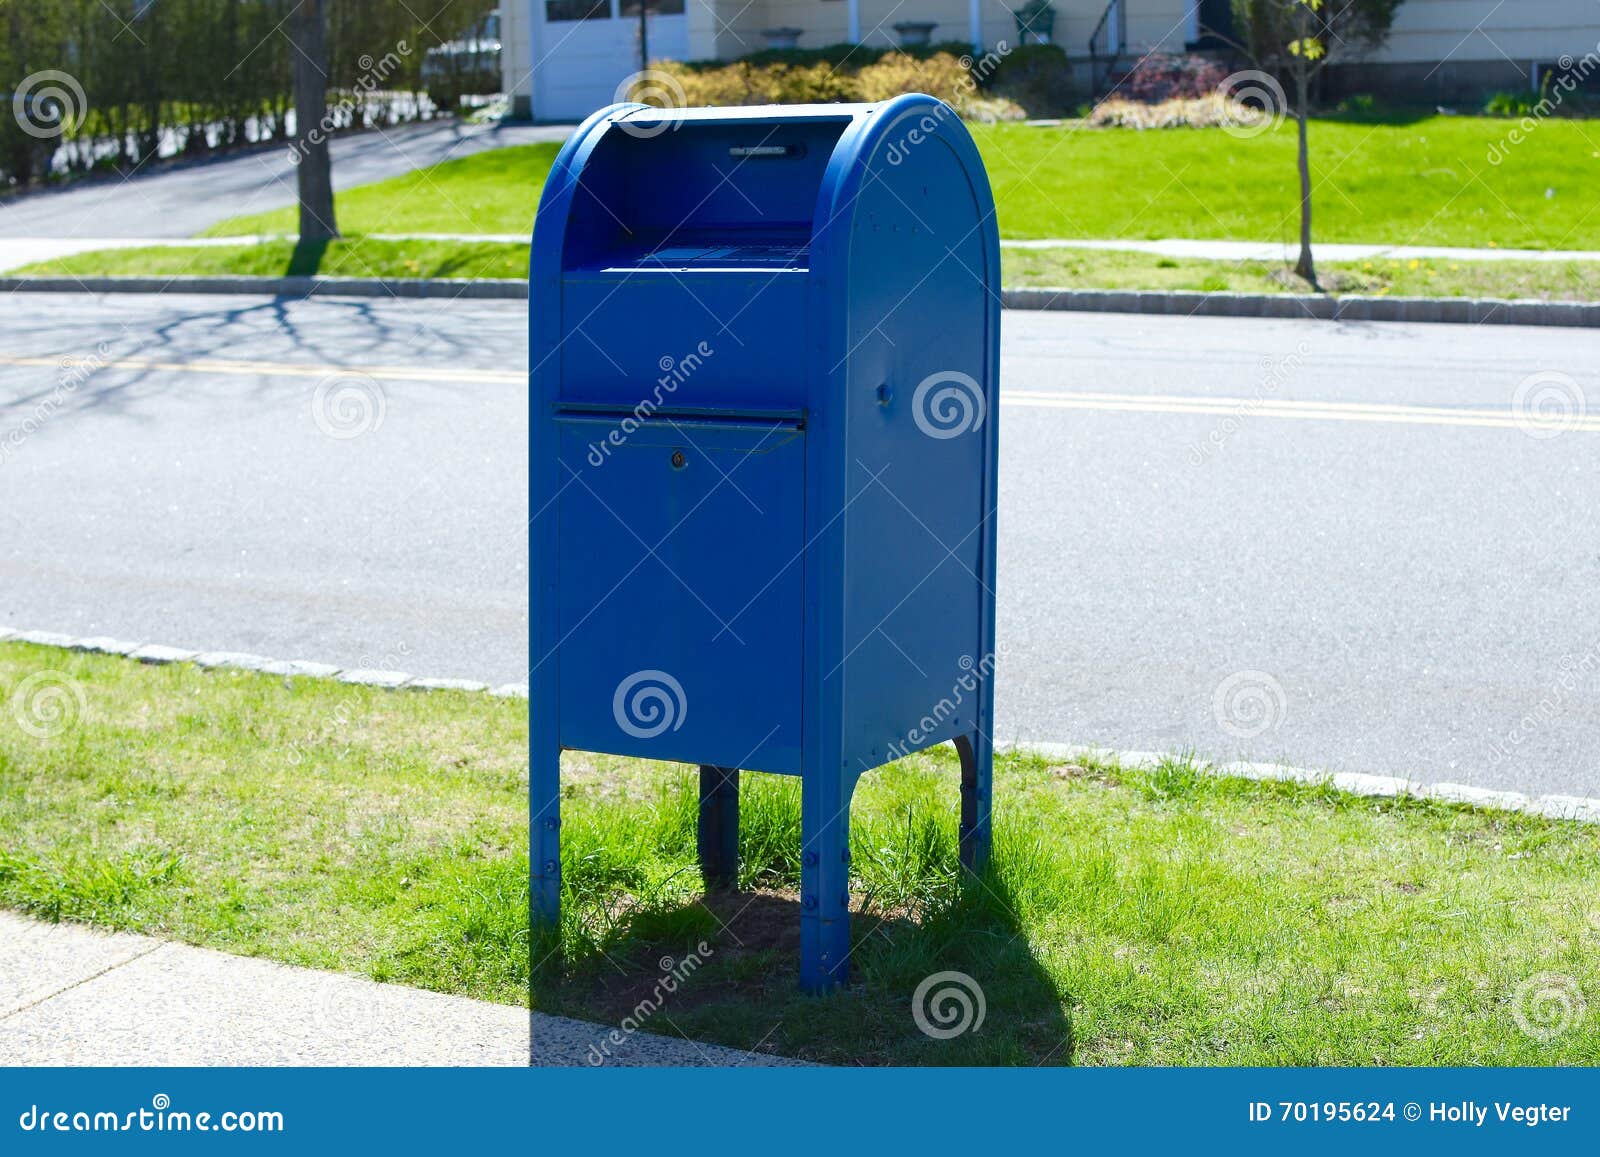 Post office mail box stock photo. Image of postal, postage - 70195624